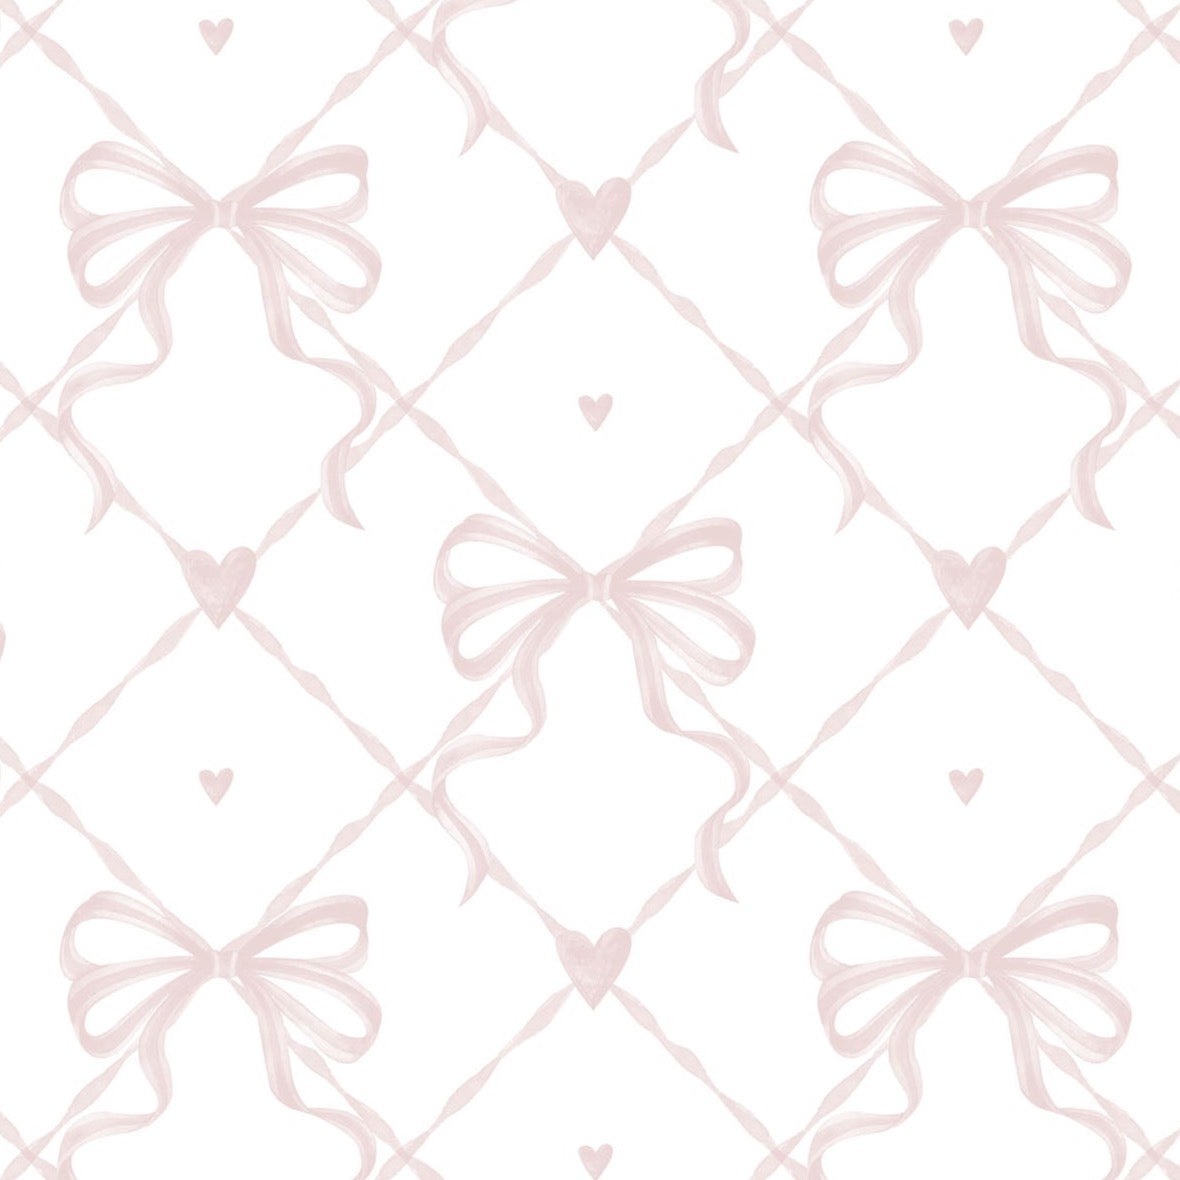 Close-up view of Delicate Watercolour Bows Wallpaper showing intricate details of the watercolor bows and tiny hearts in a soft pink hue, creating a romantic and gentle ambiance suitable for various interior designs